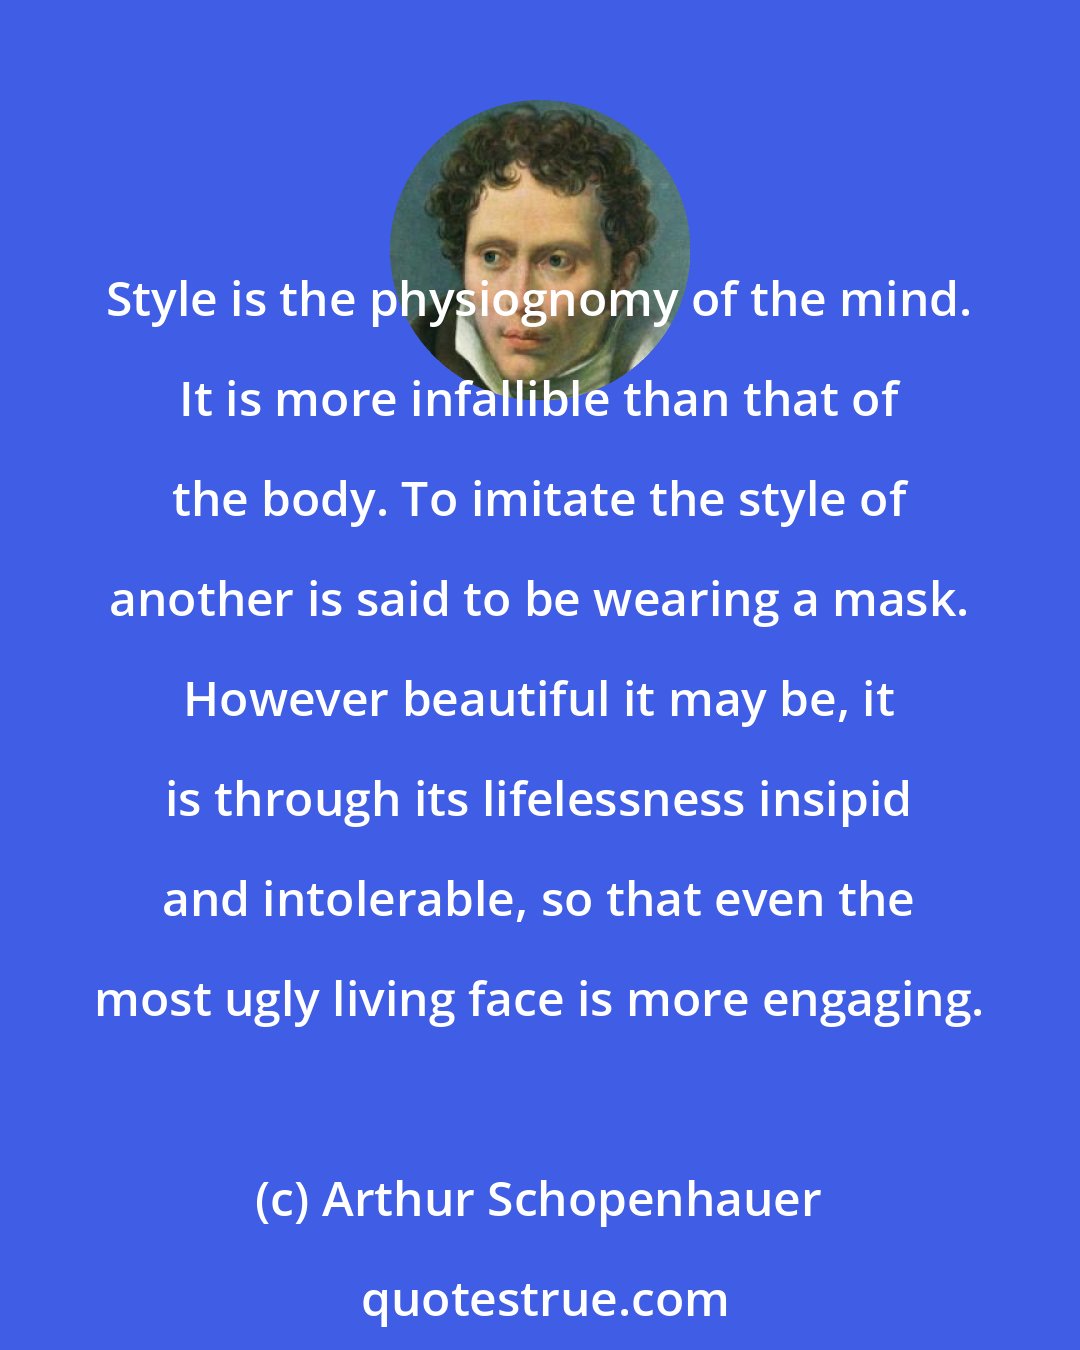 Arthur Schopenhauer: Style is the physiognomy of the mind. It is more infallible than that of the body. To imitate the style of another is said to be wearing a mask. However beautiful it may be, it is through its lifelessness insipid and intolerable, so that even the most ugly living face is more engaging.